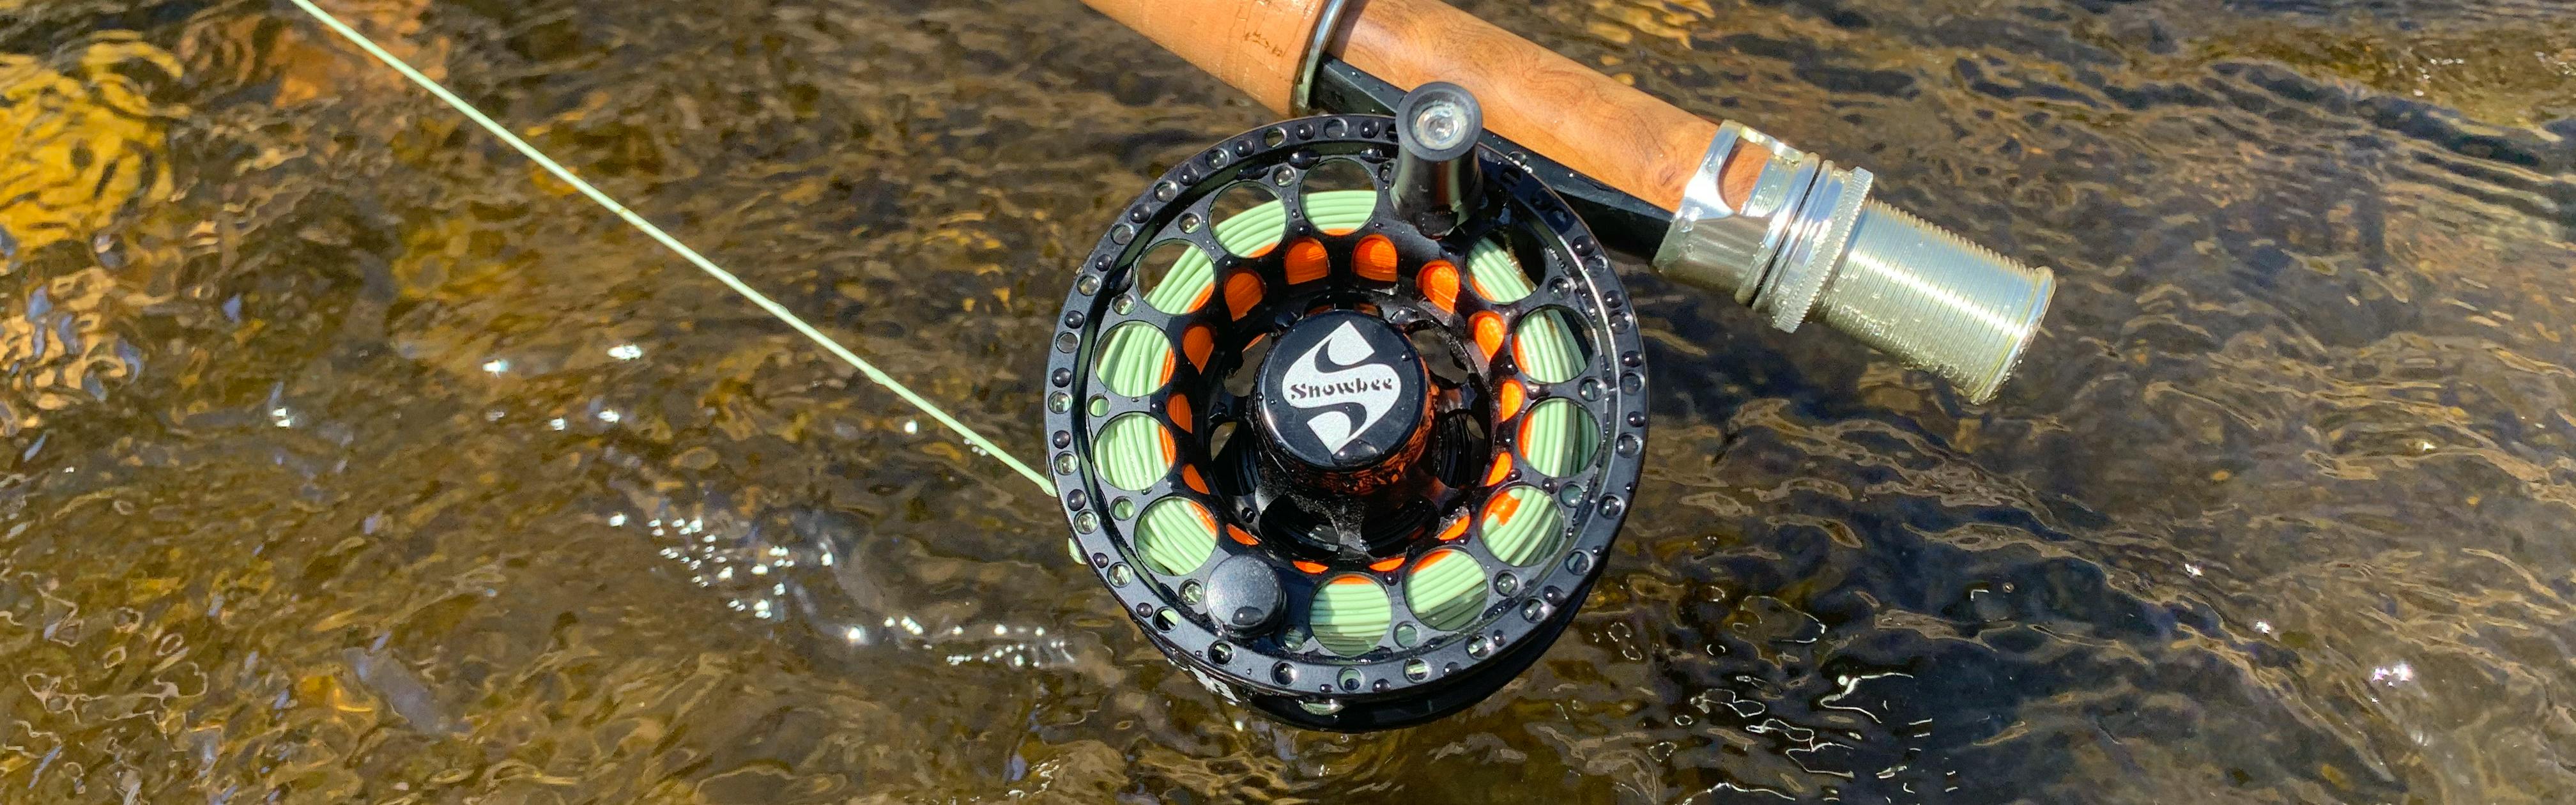 An image of a Snowbee flyfishing reel sitting above a water source.